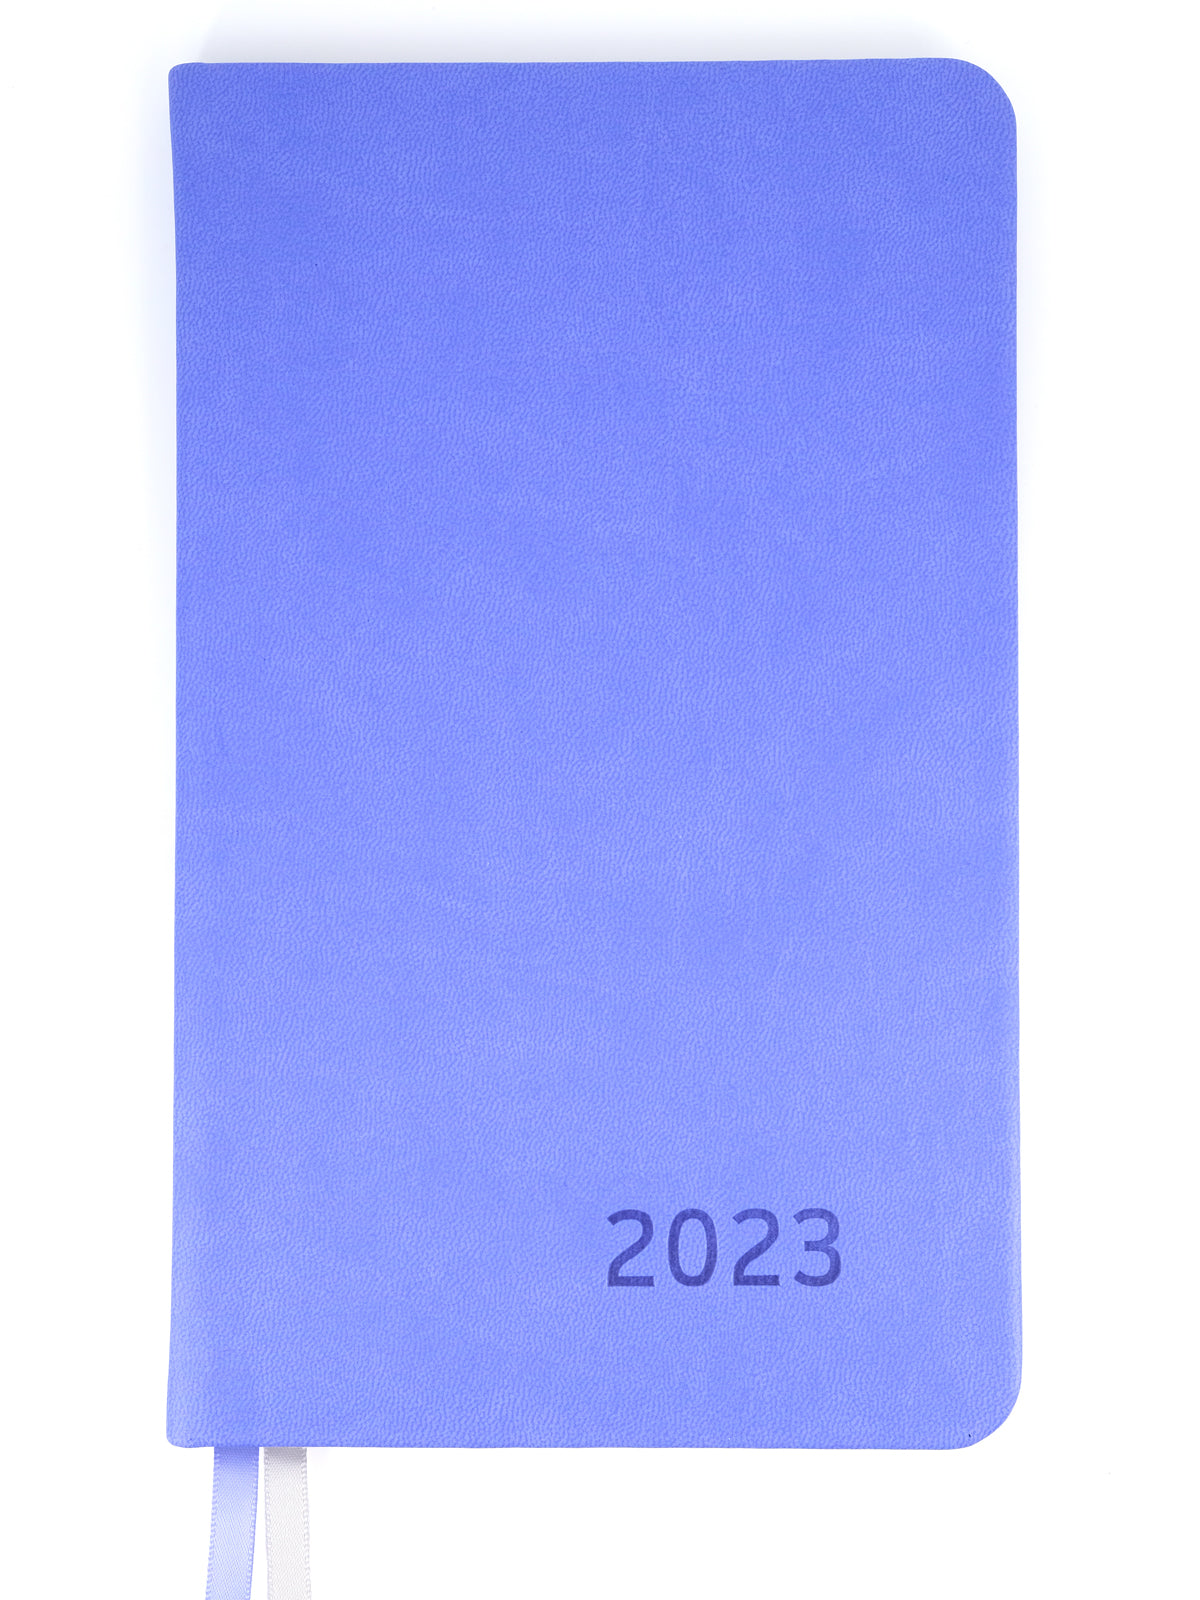 2023 Planner - Yearly, Weekly, Monthly, Daily Planner 2023-2024 with Calendar 2023-2024 Planner Organizer (Periwinkle)